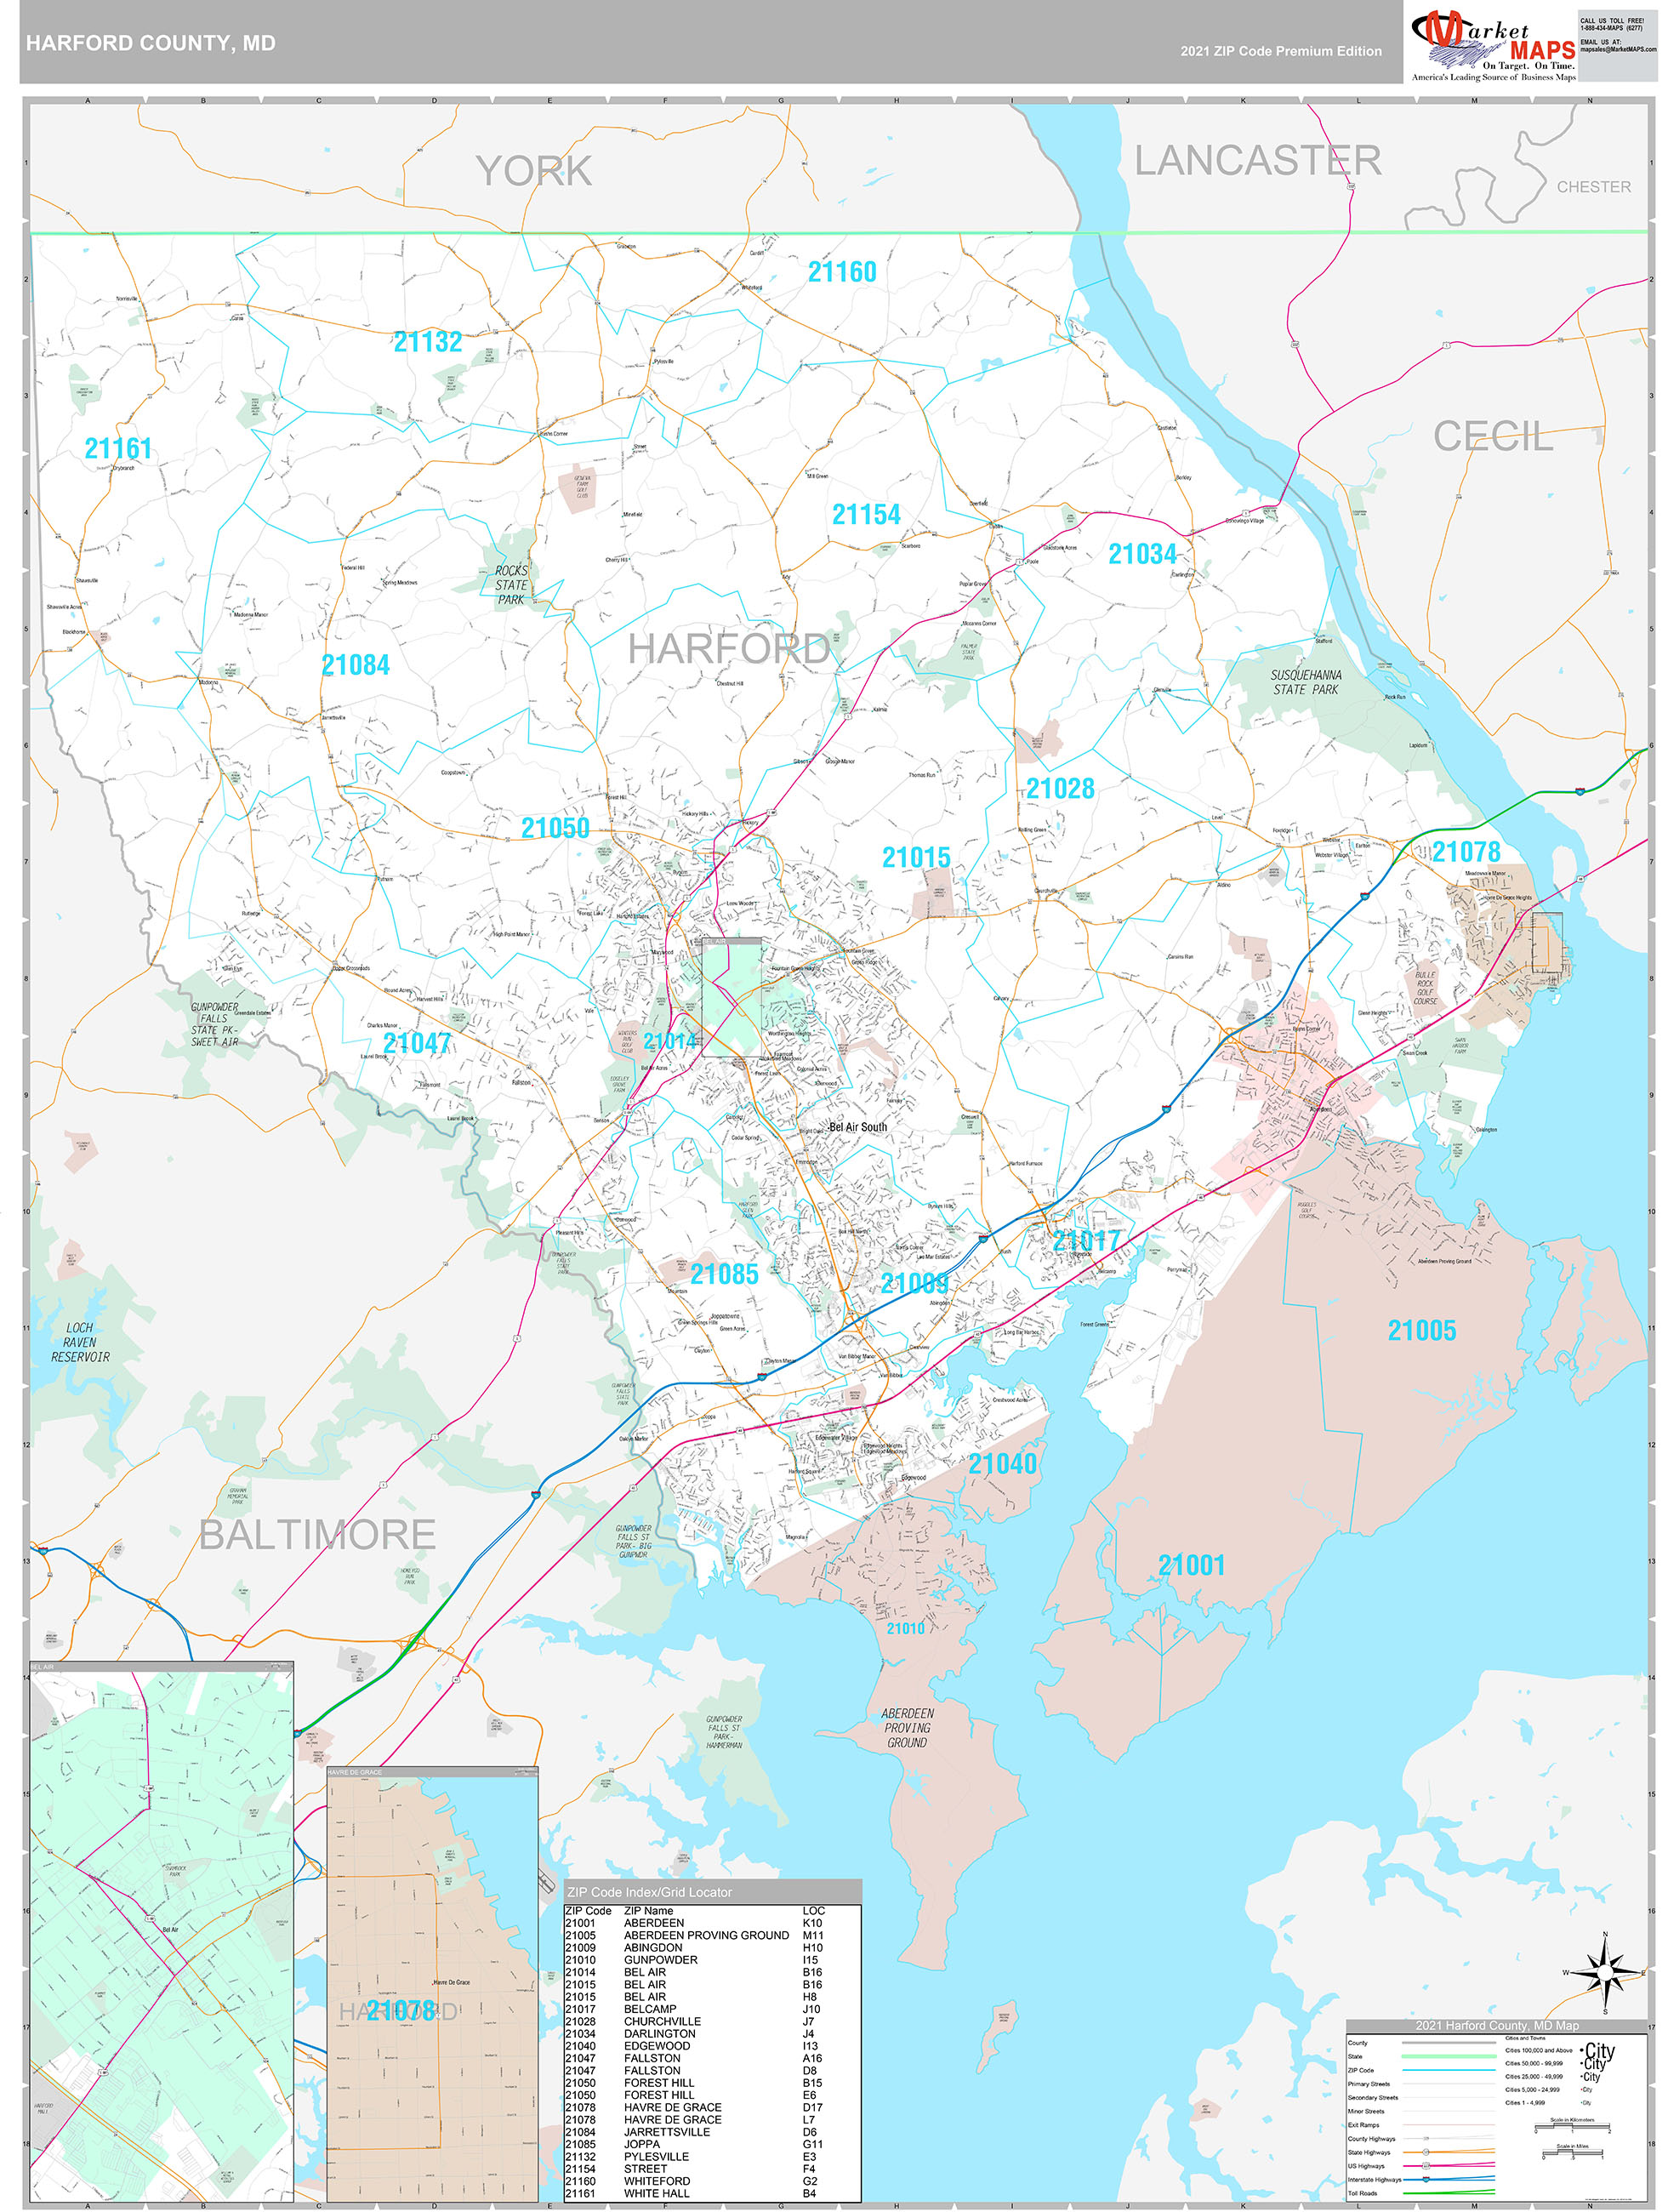 Harford County, MD Wall Map Premium Style by MarketMAPS - MapSales